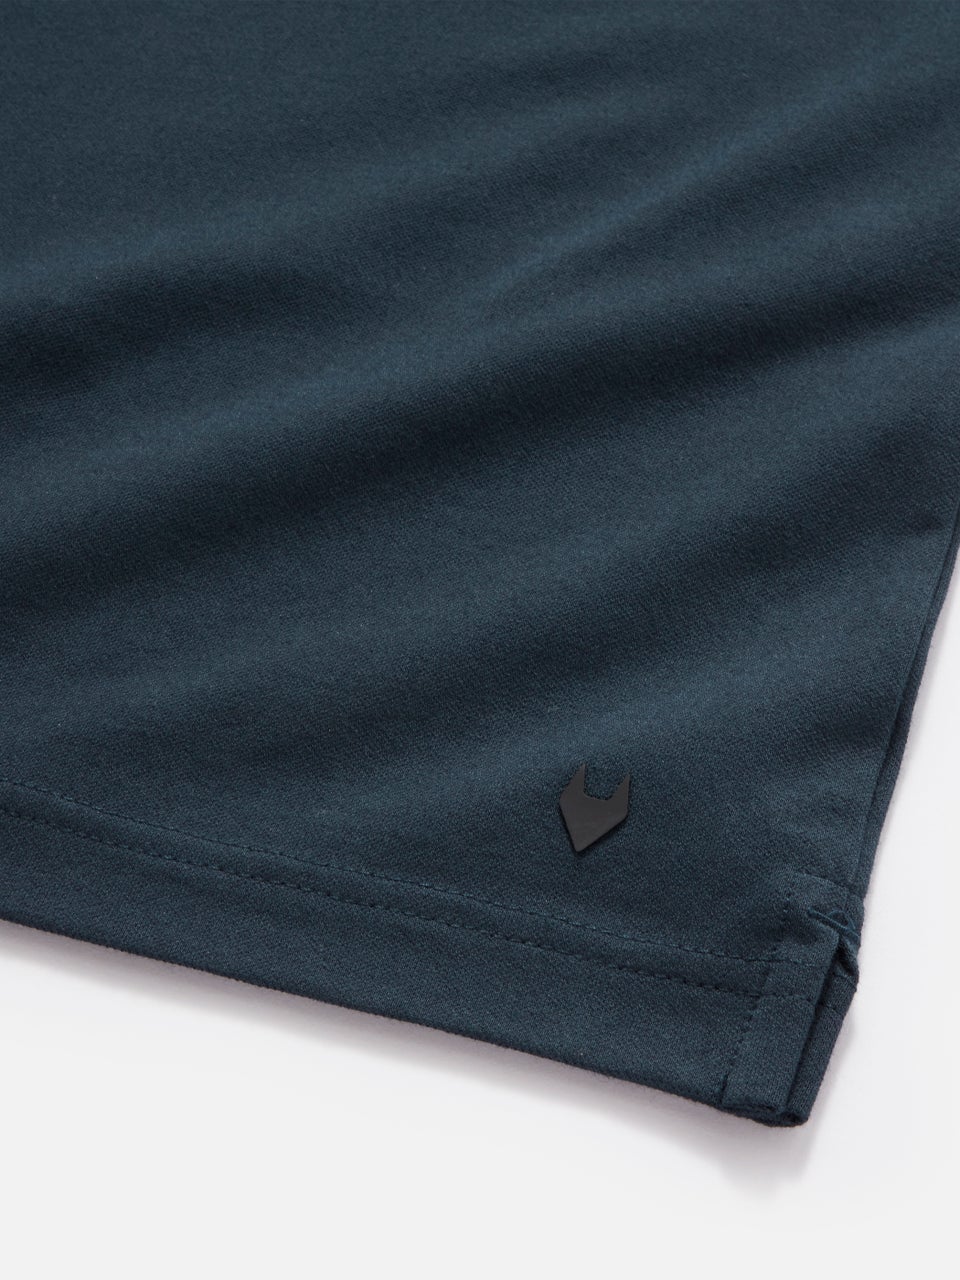 In Motion Performance Pique Polo Navy